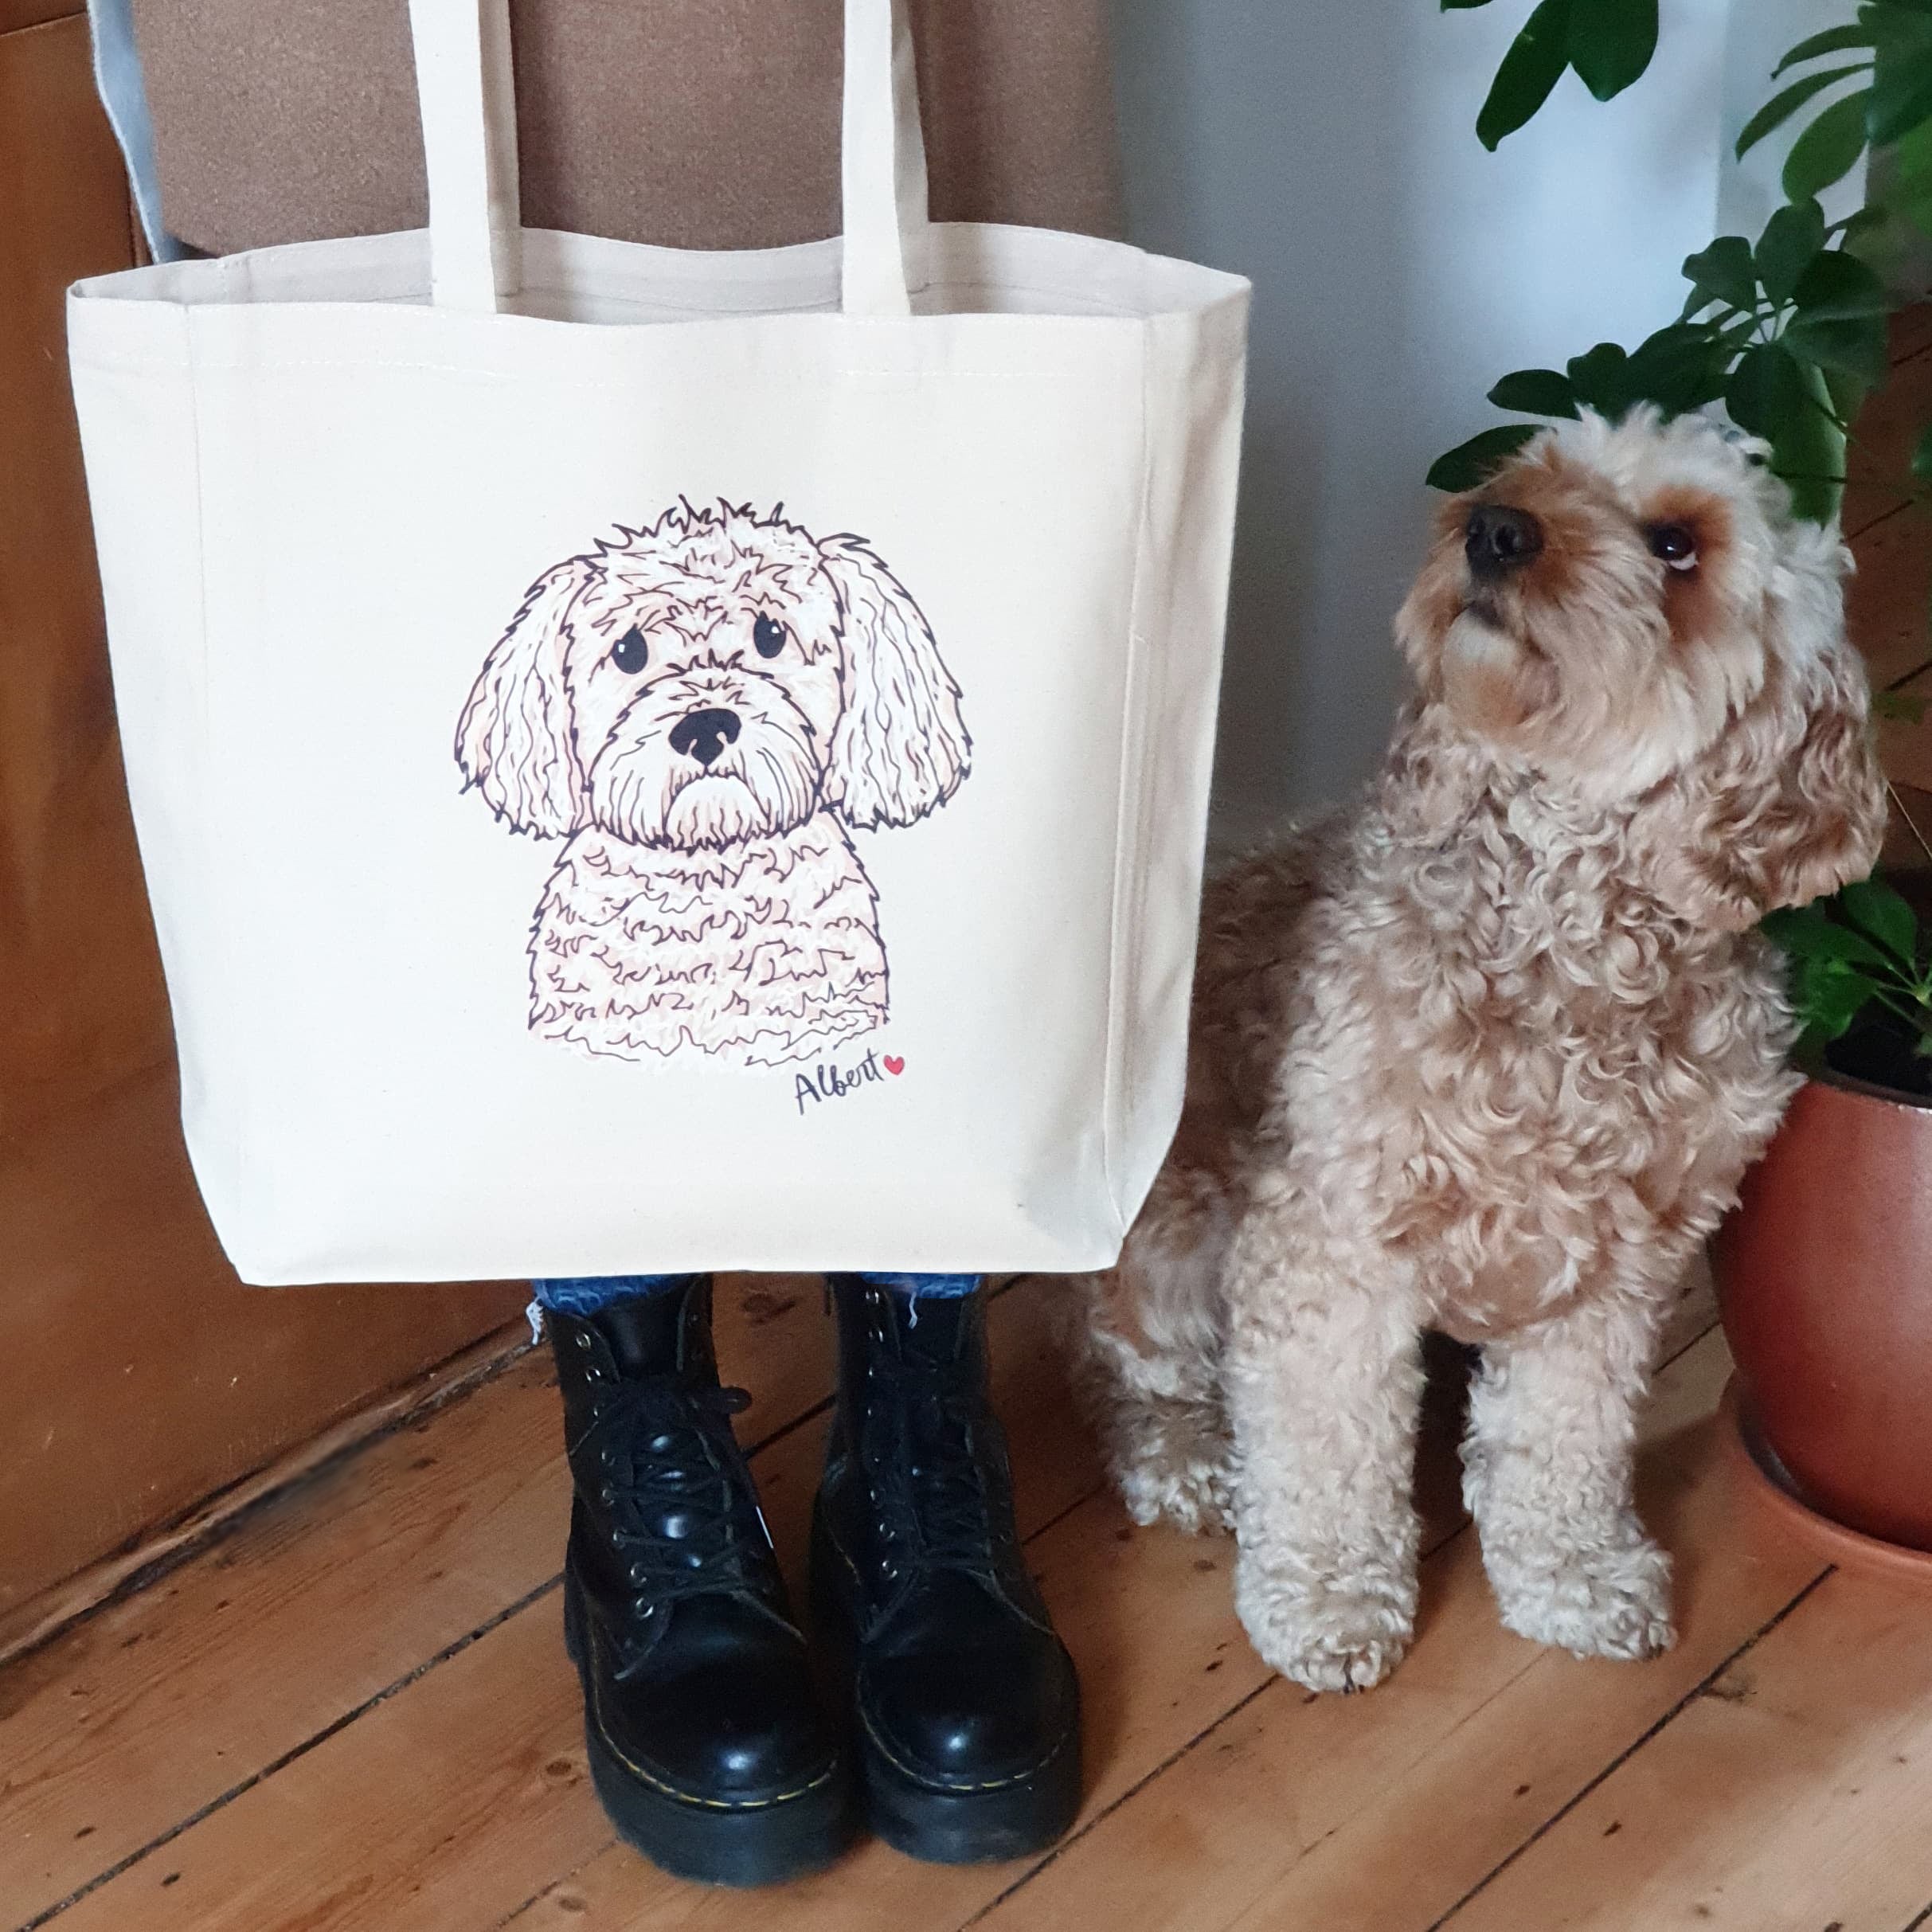 The Personalised Dog Tote